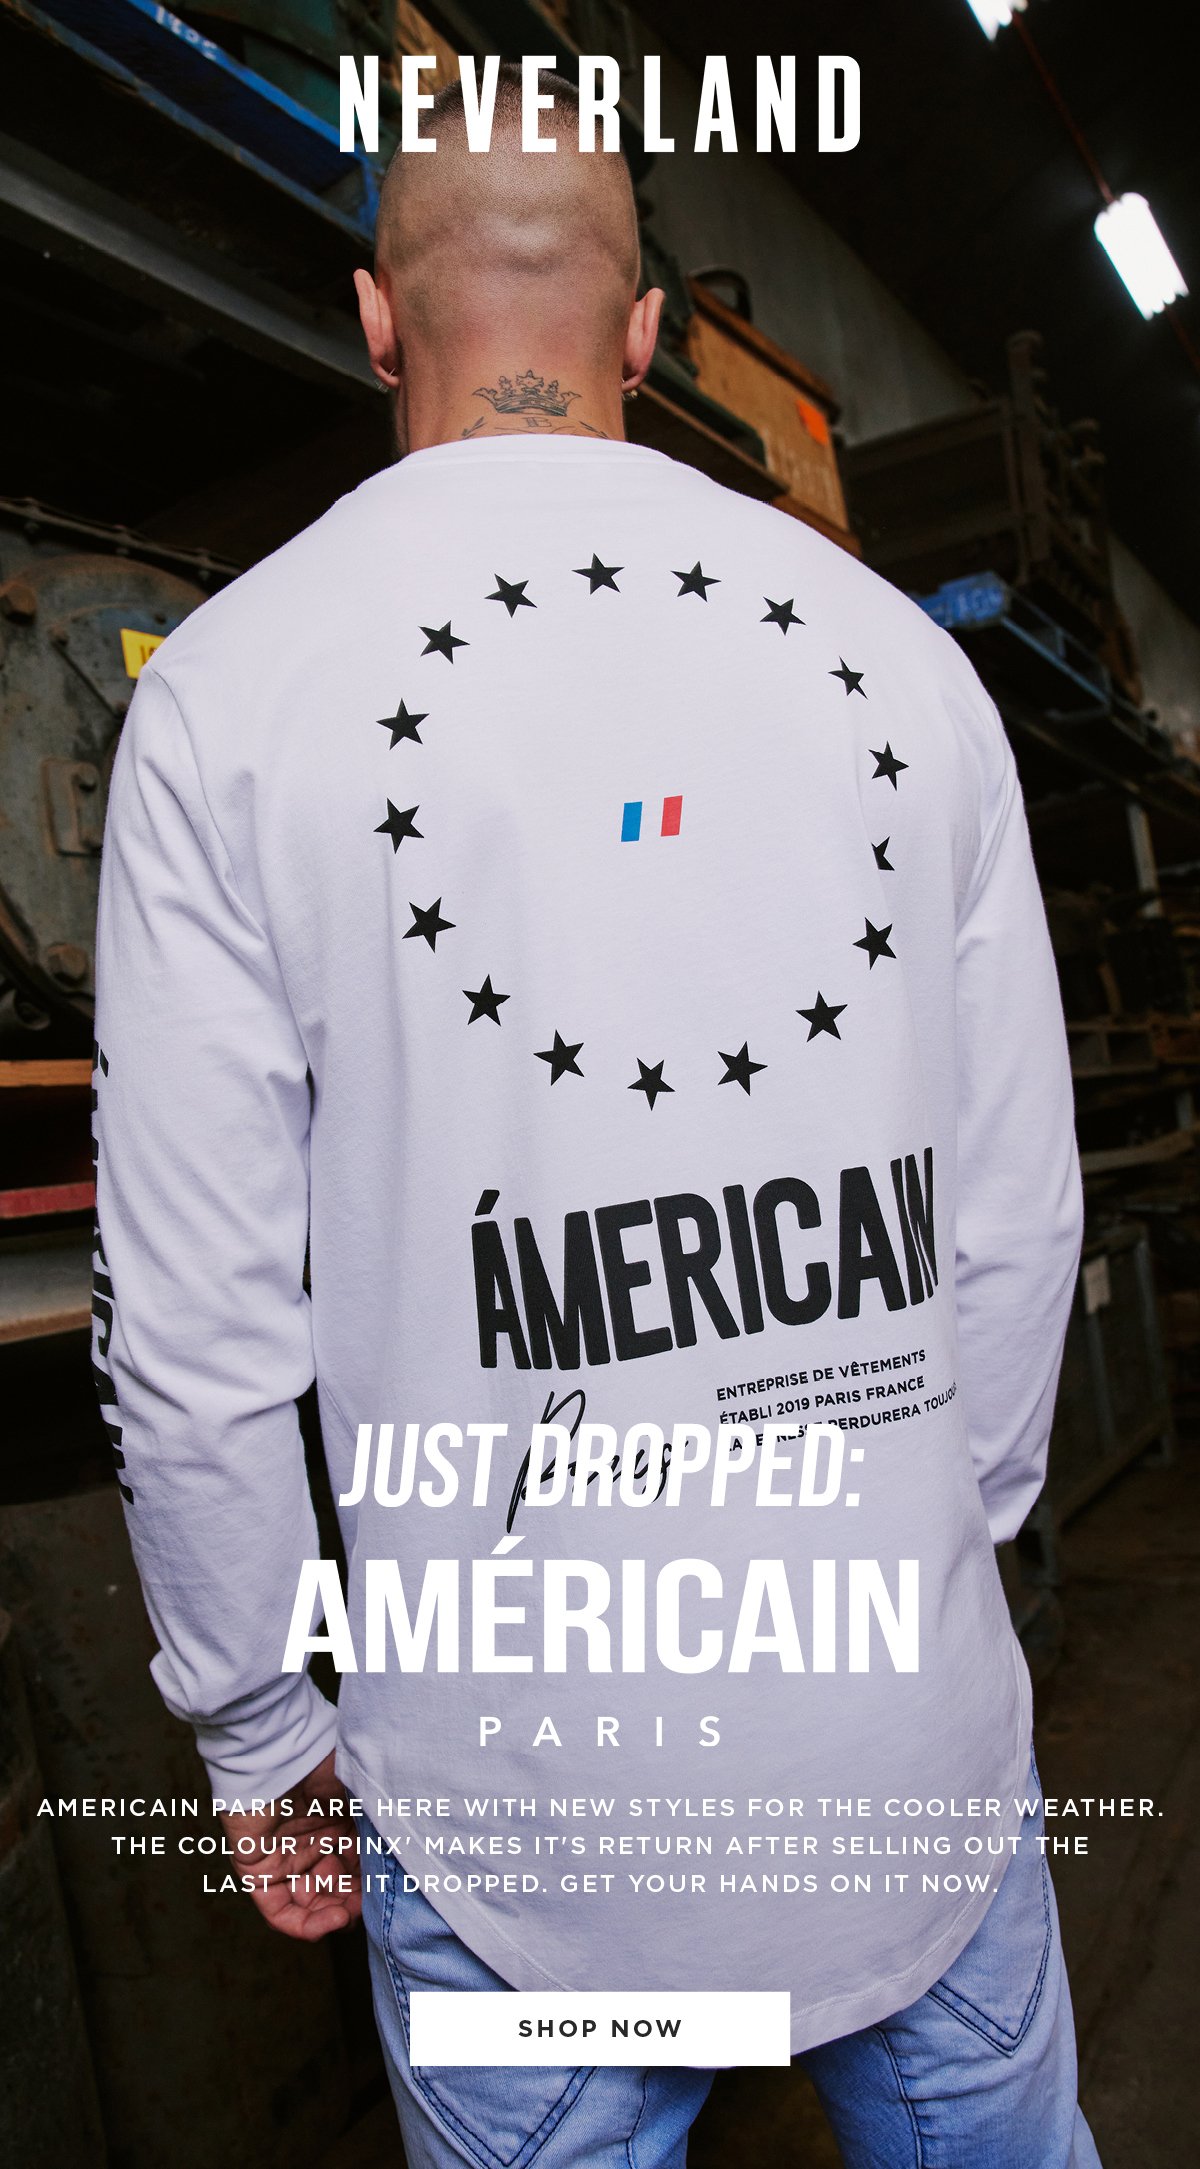 Just Dropped: Americain